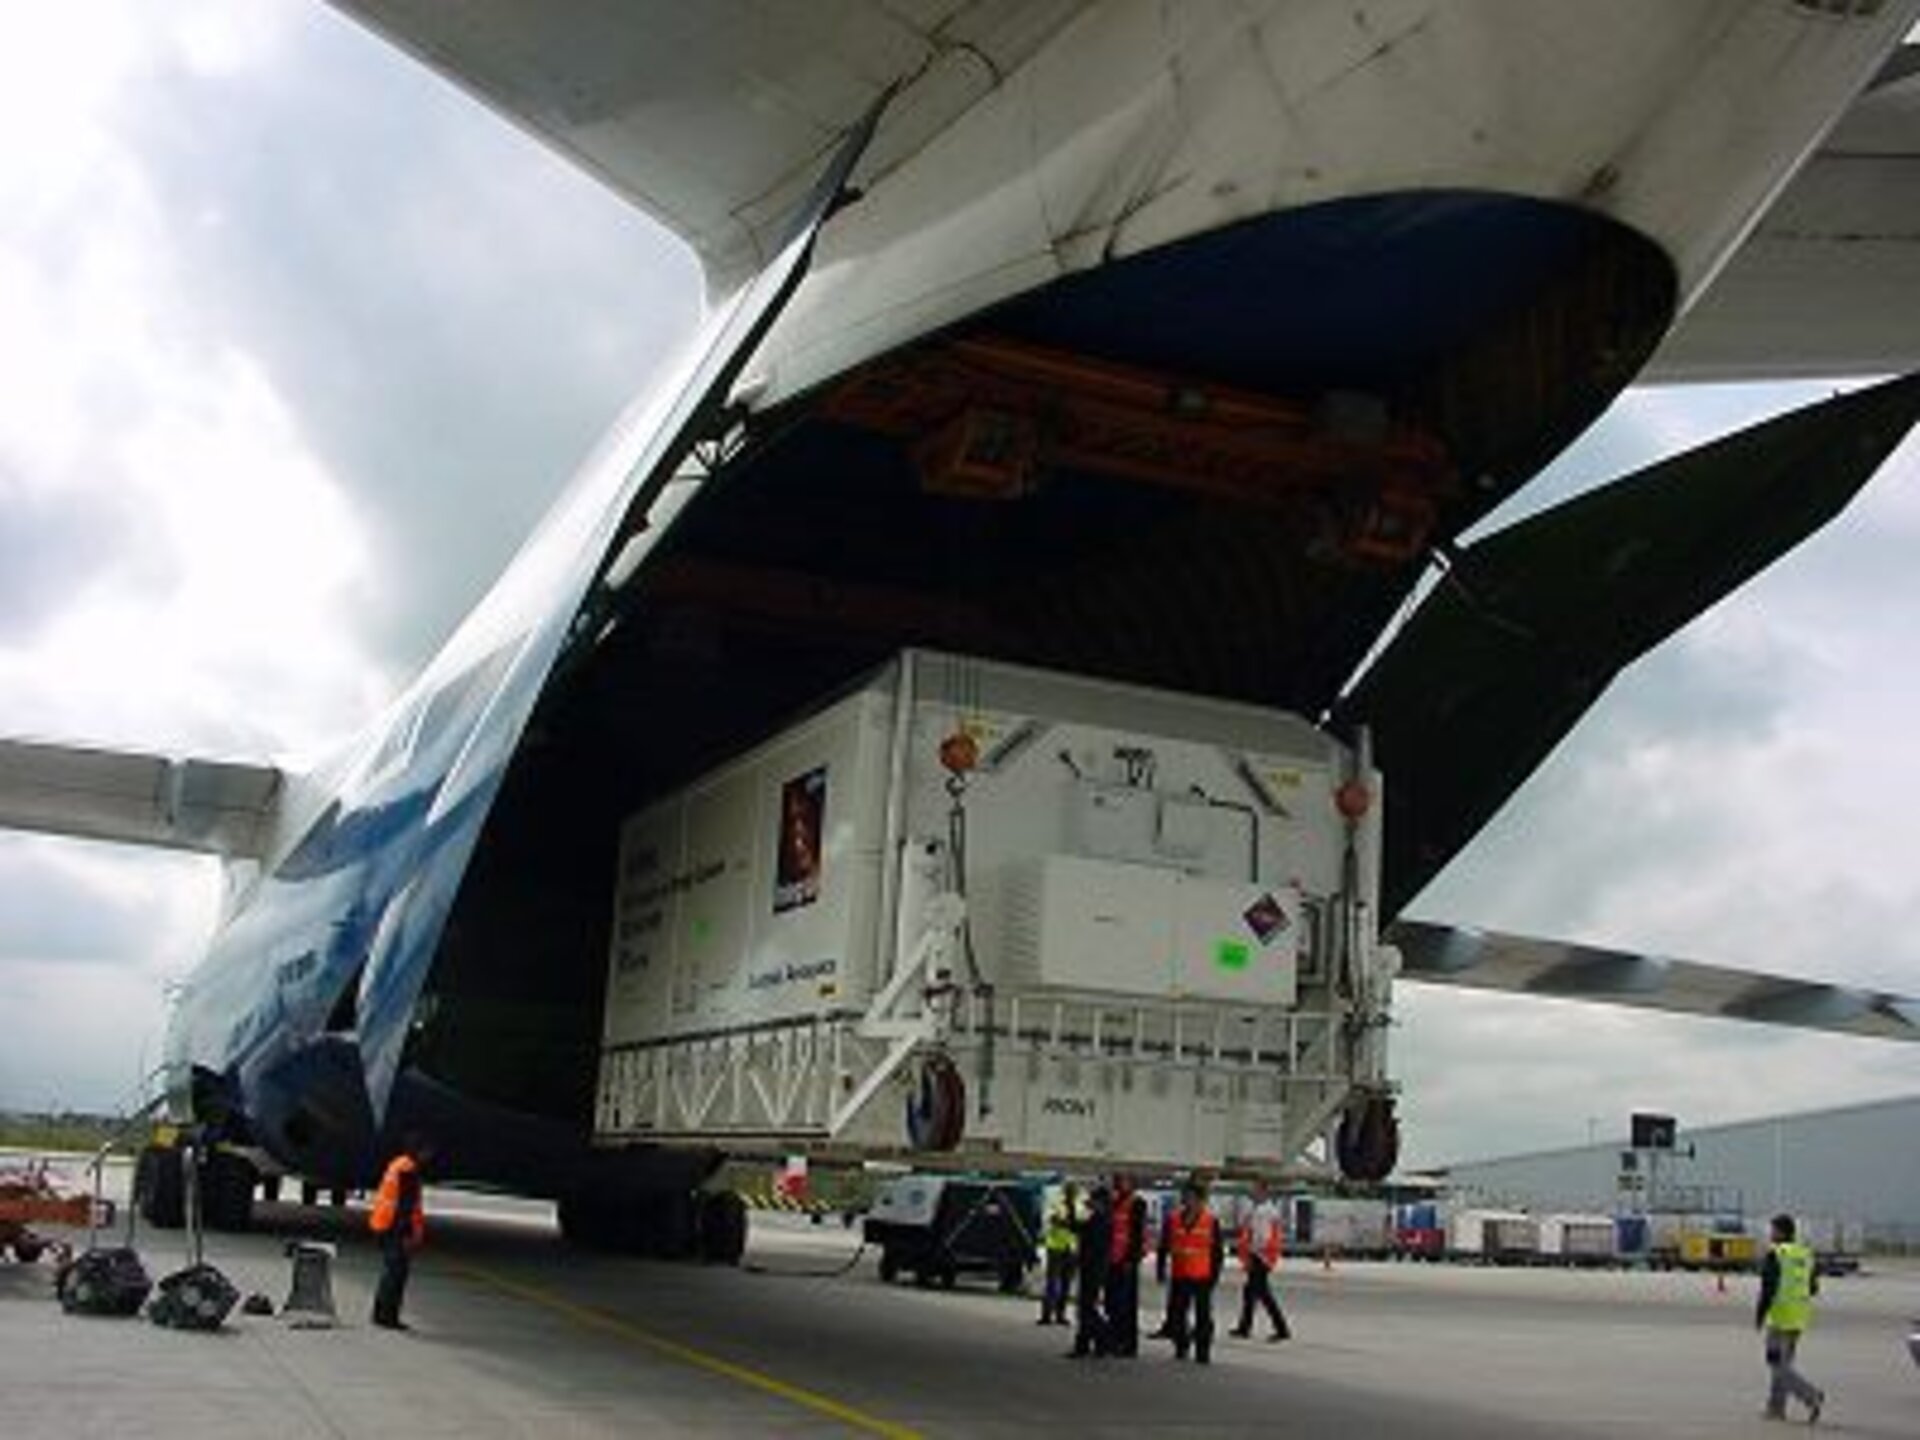 Integral is loaded onto the Antonov 124 at Schiphol